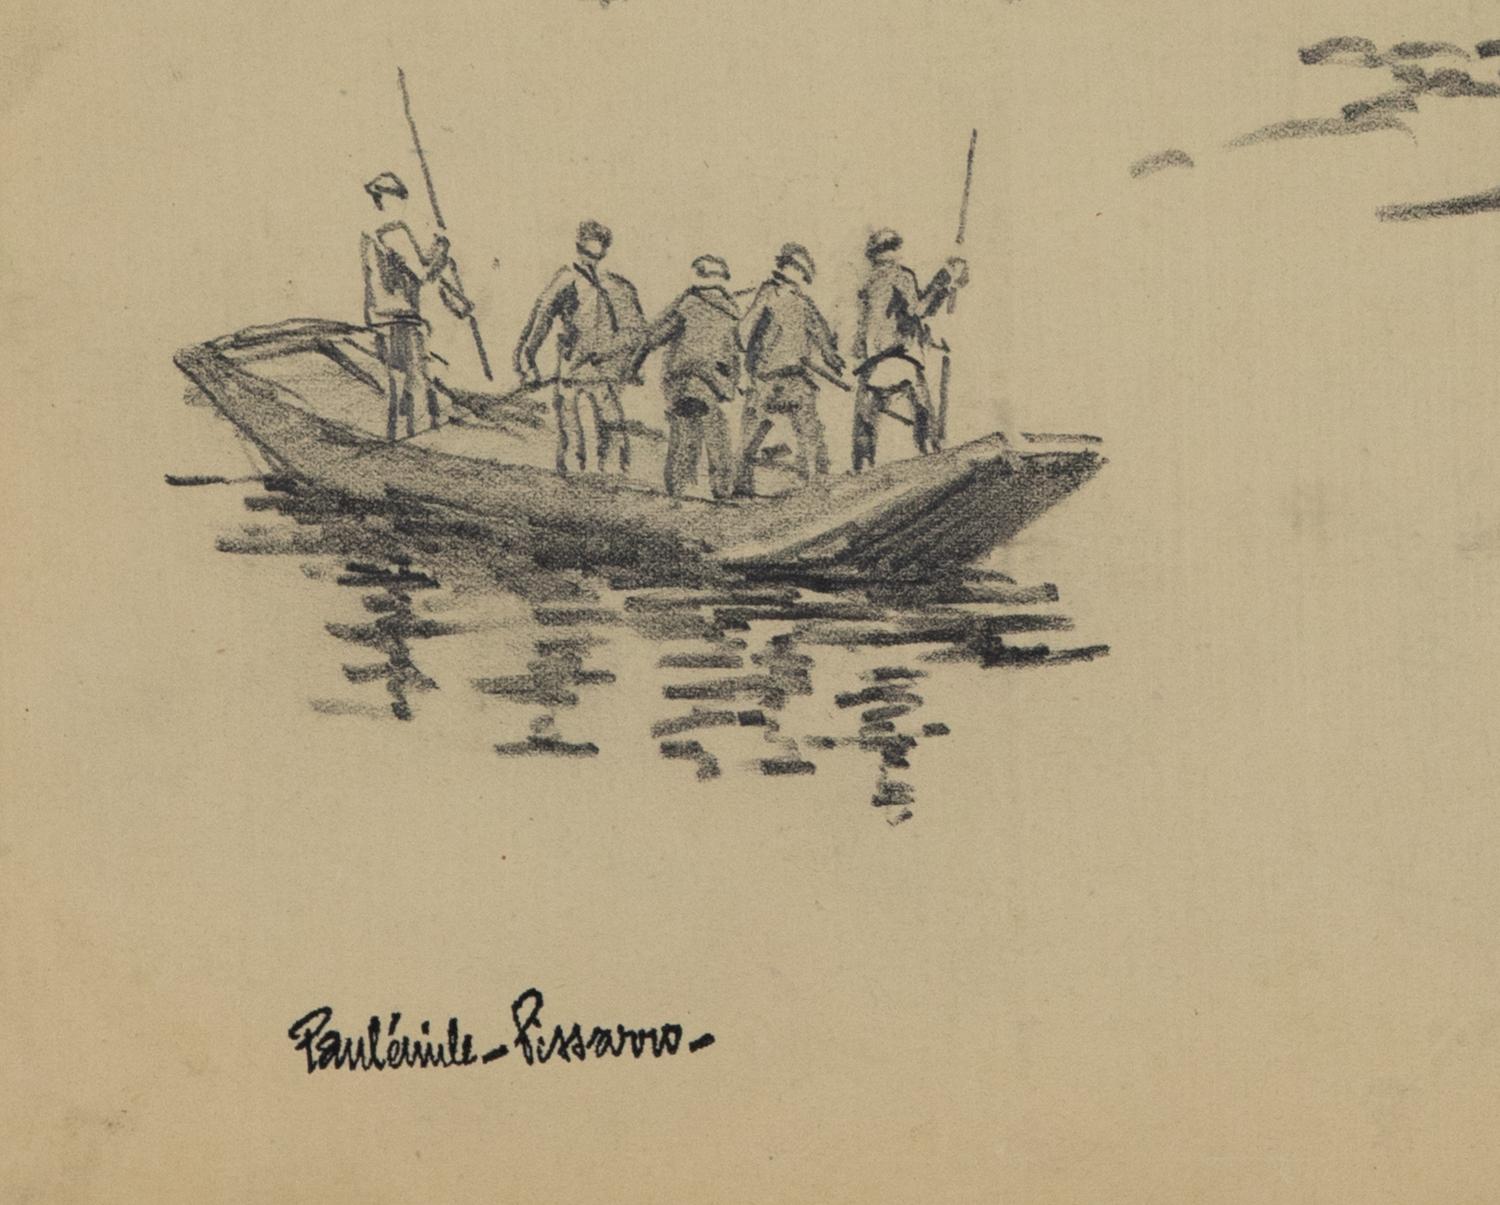 Pêcheurs by Paulémile Pissarro (1884-1972)
Pencil on paper
23.1cm x 30.9
Stamped lower left, Paulémile-Pissarro-

This work is accompanied by a certificate of authenticity by Lélia Pissarro.

Artist biography
Paulémile Pissarro, Camille Pissarro’s